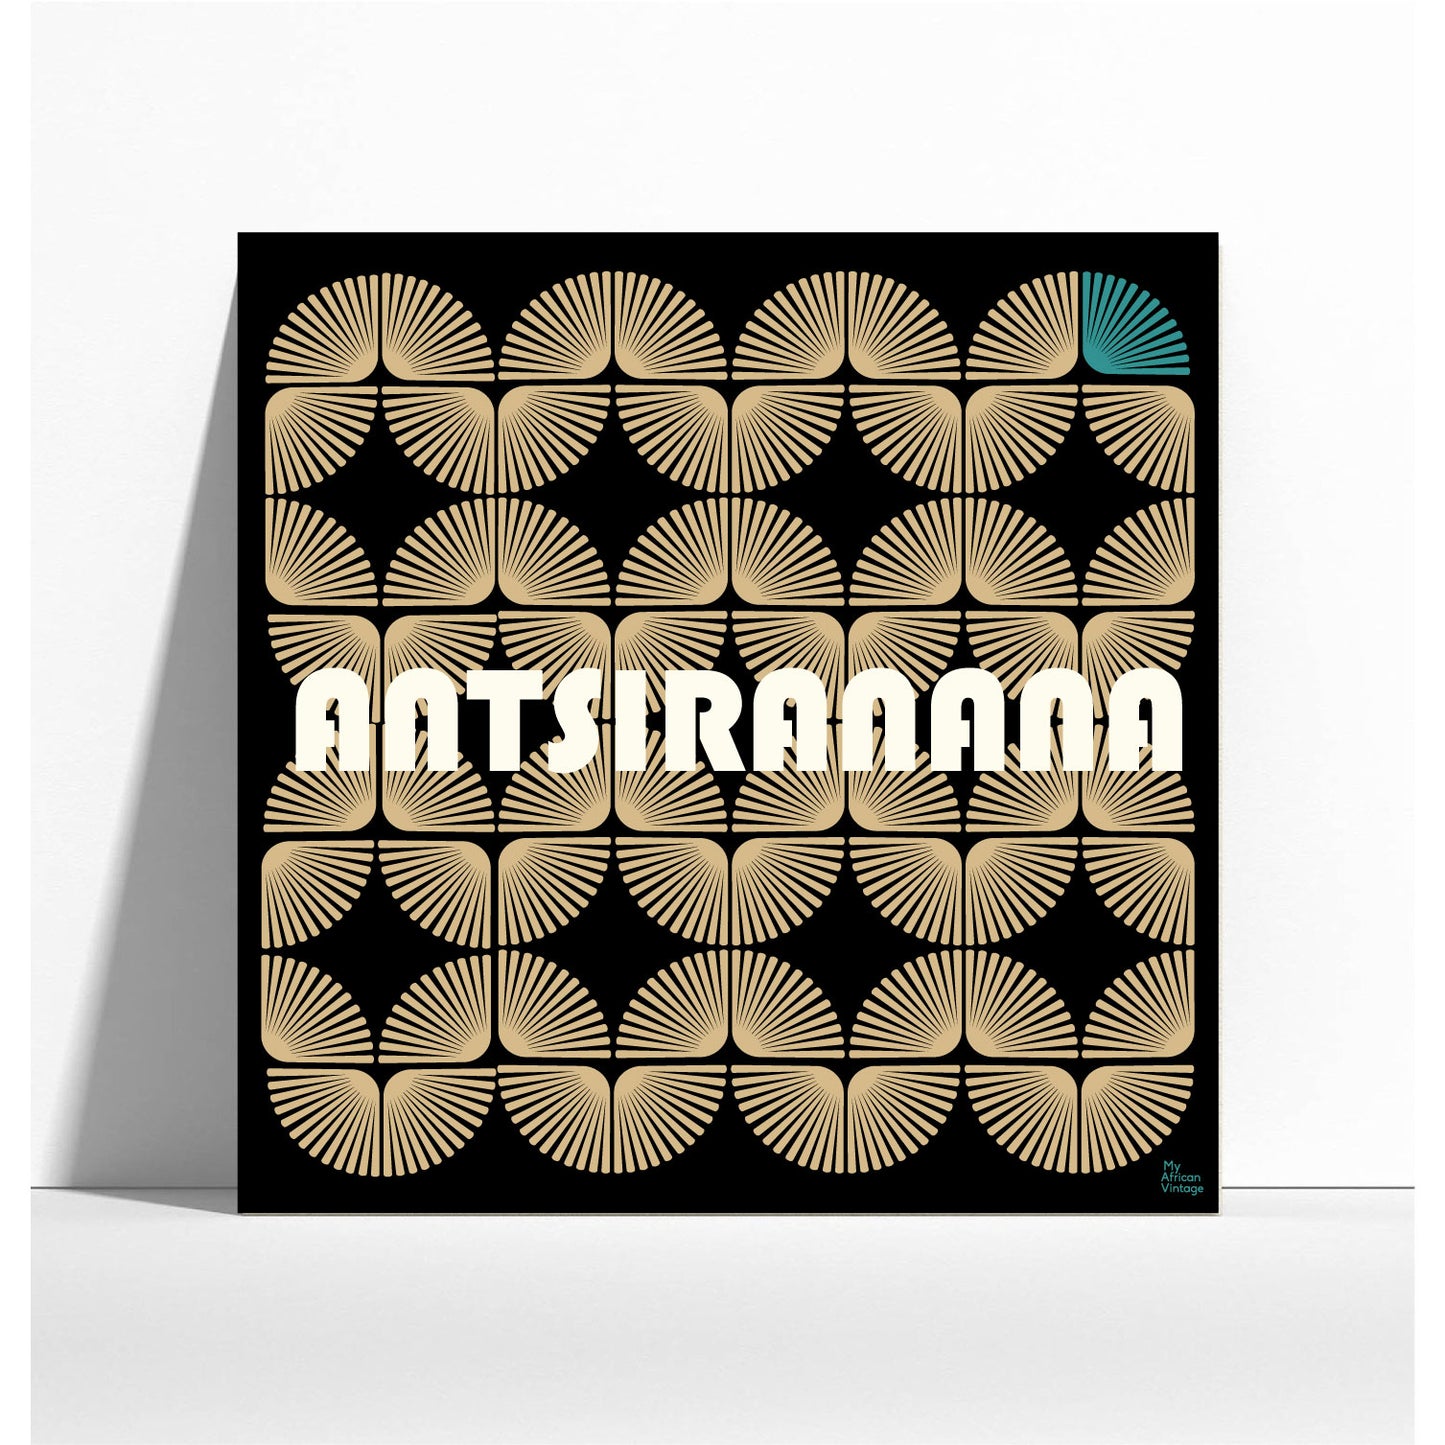 "Antsiranana" retro style poster - "My African Vintage" collection